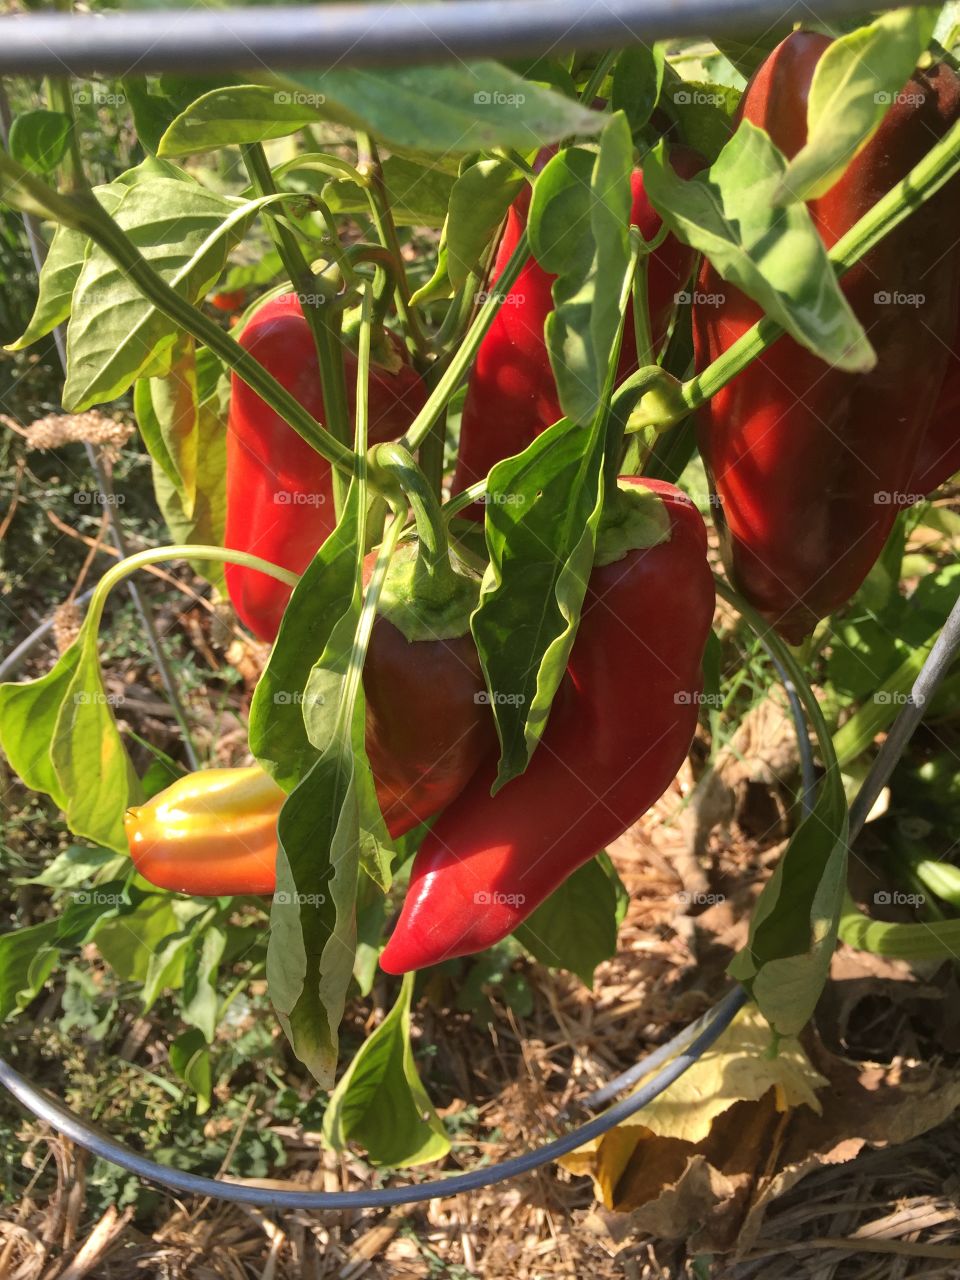 Sweet red peppers in a thirst garden